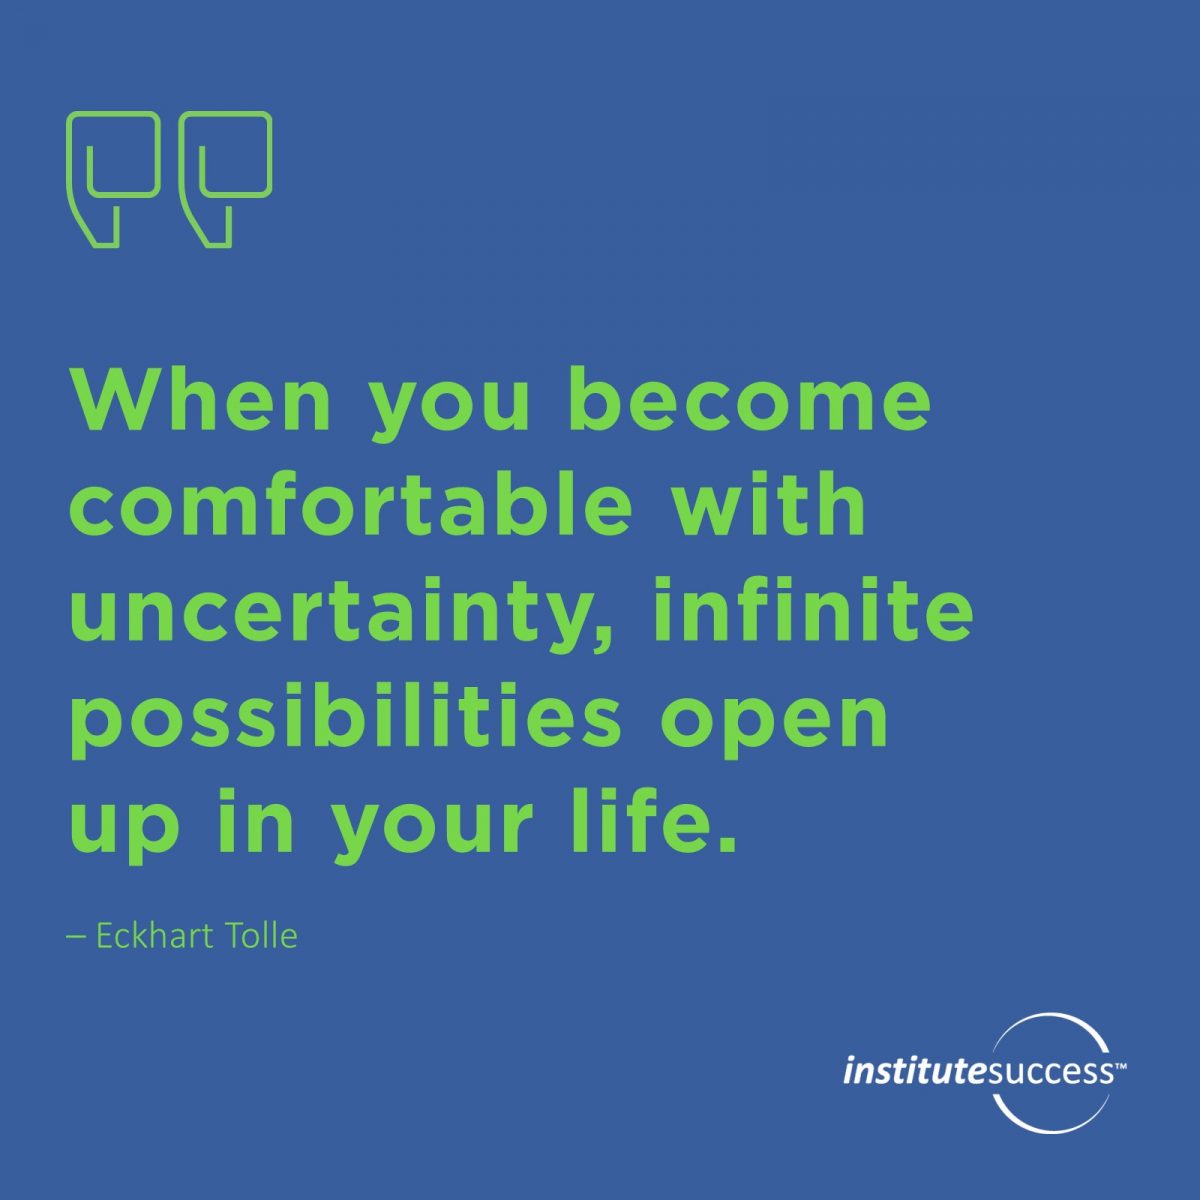 When you become comfortable with uncertainty, infinite possibilities open up in your life.  Eckhart Tolle